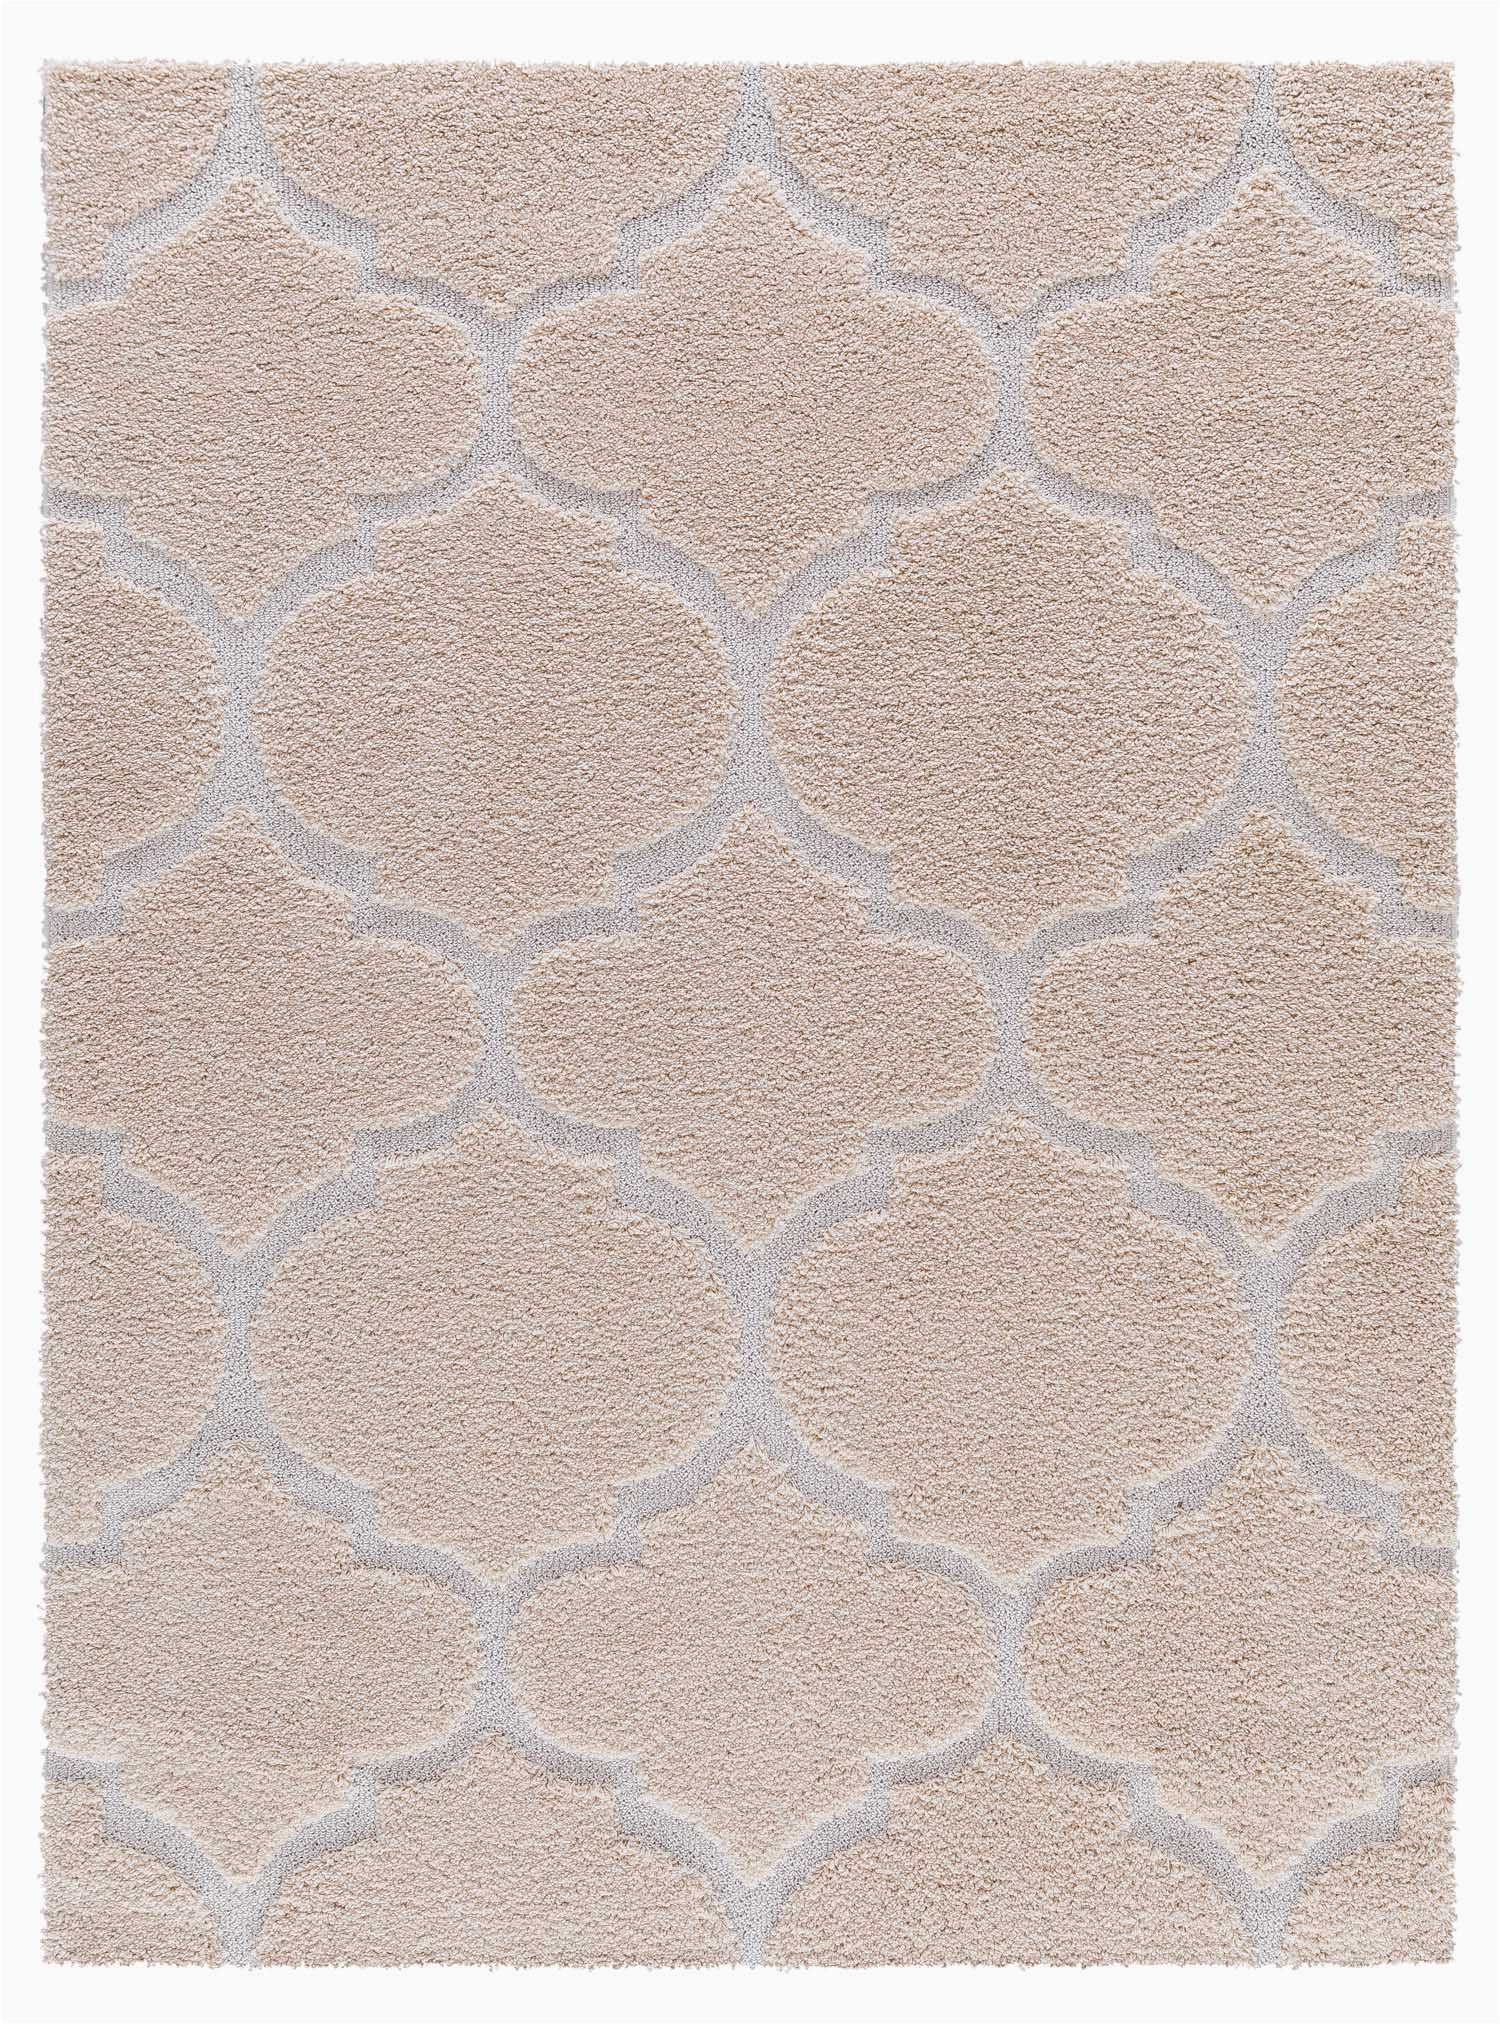 8 by 7 area Rugs Mod Arte Platinum Shag Collection Plush area Rug Modern Contemporary Style Beige White